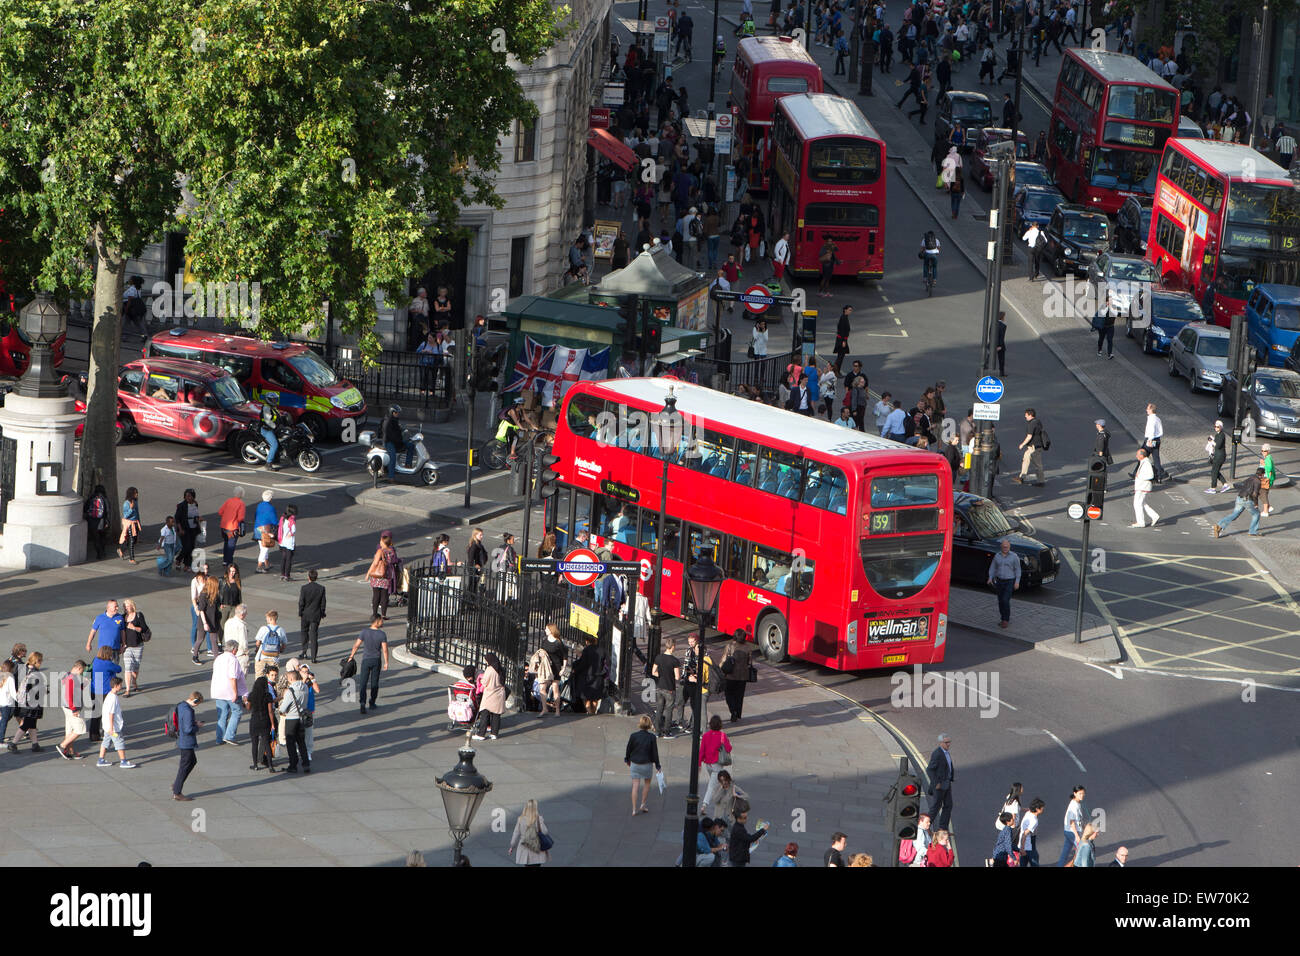 Red double decker bus on busy street in central London Stock Photo